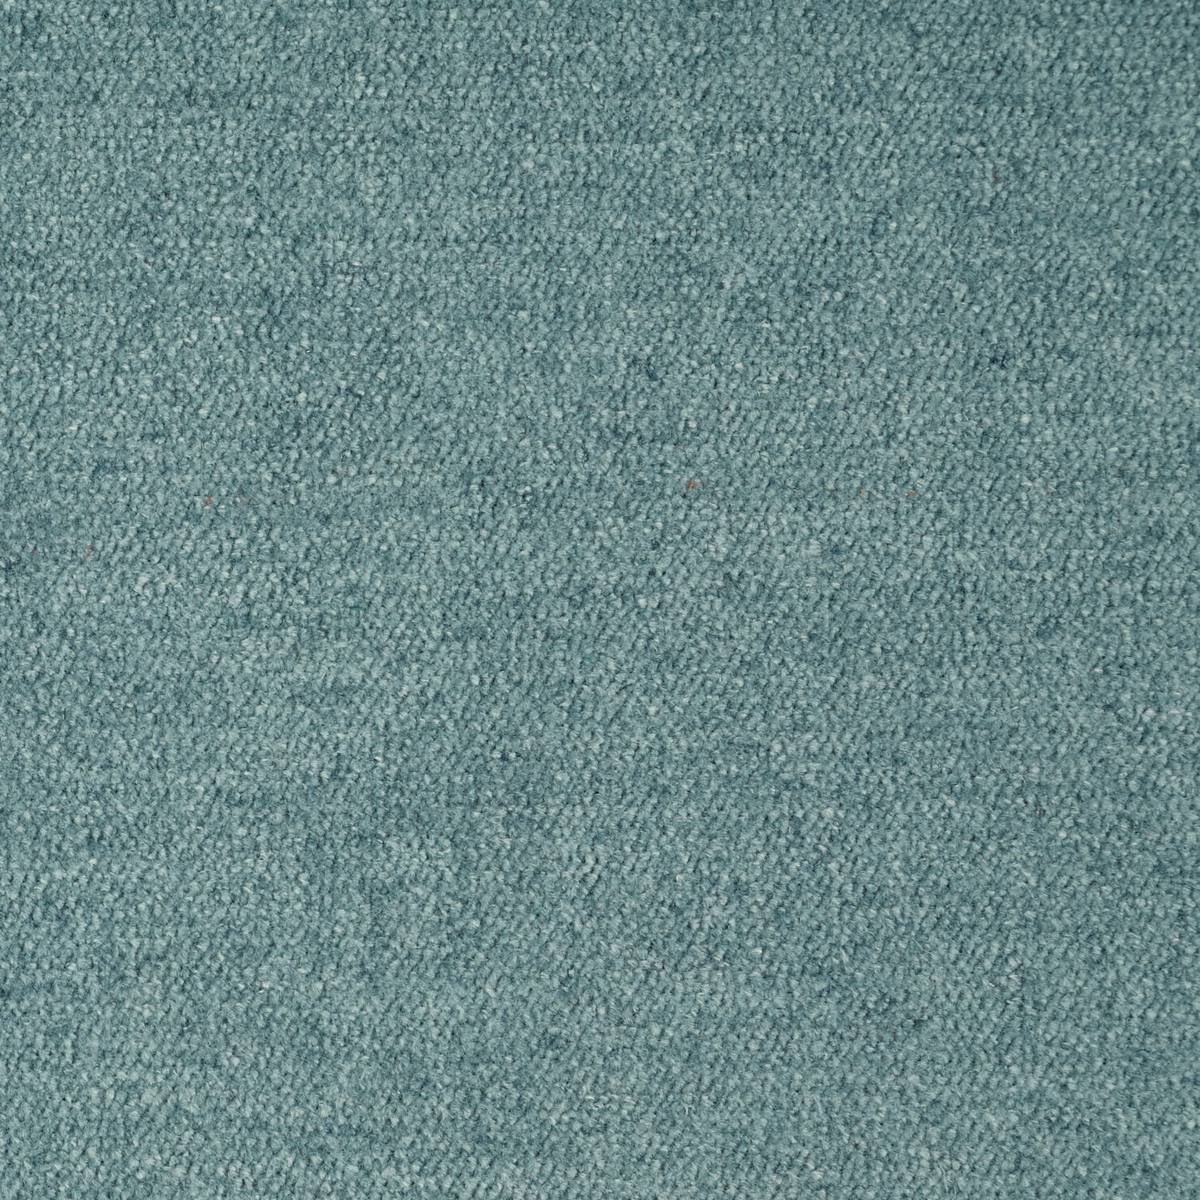 Marly Chenille Sea Blue Fabric by Harlequin